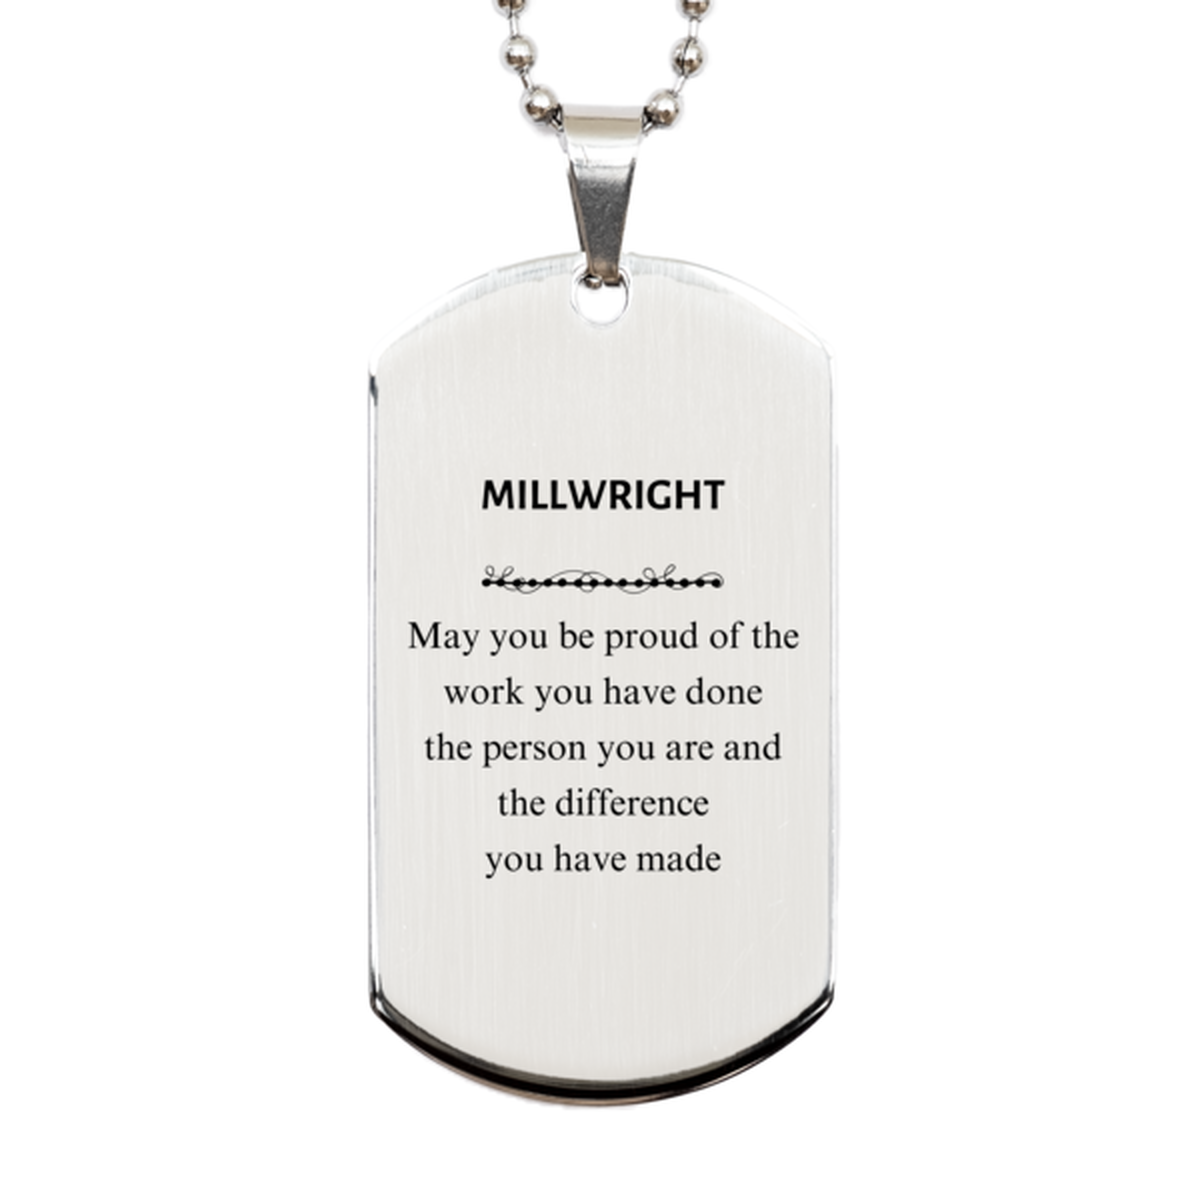 Millwright May you be proud of the work you have done, Retirement Millwright Silver Dog Tag for Colleague Appreciation Gifts Amazing for Millwright